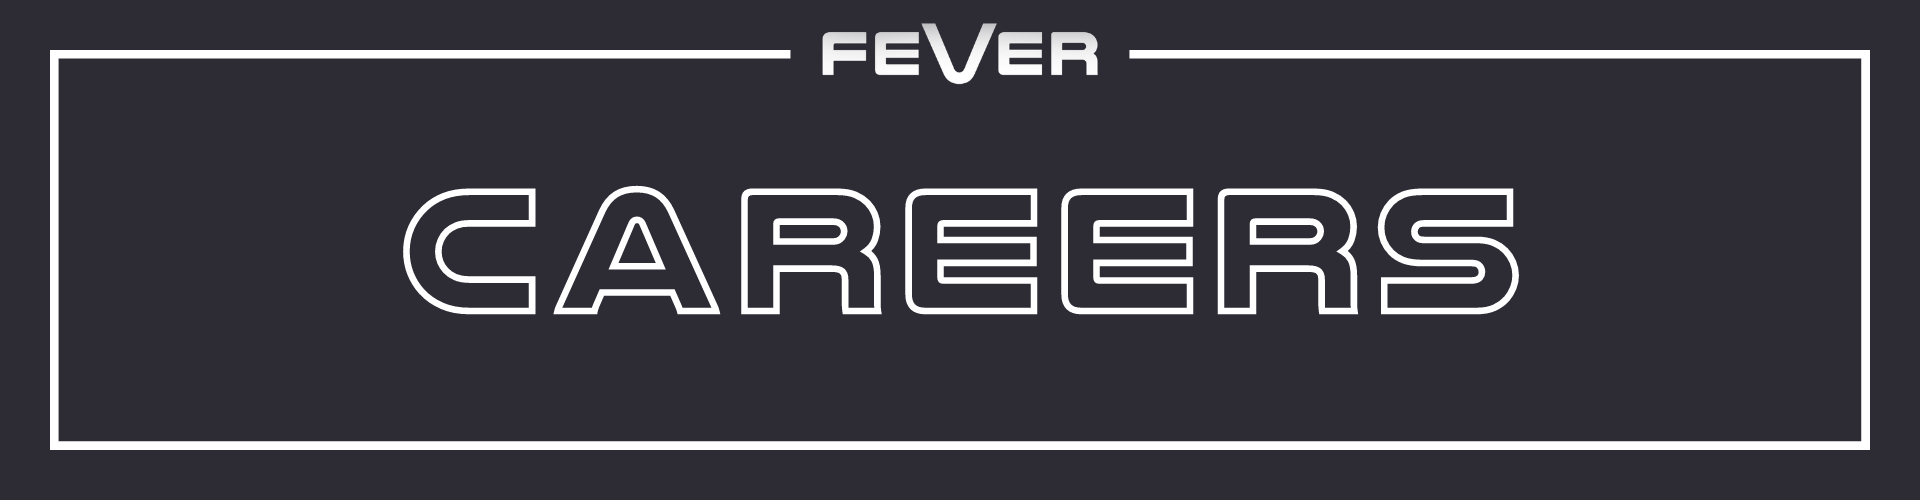 Fever Careers